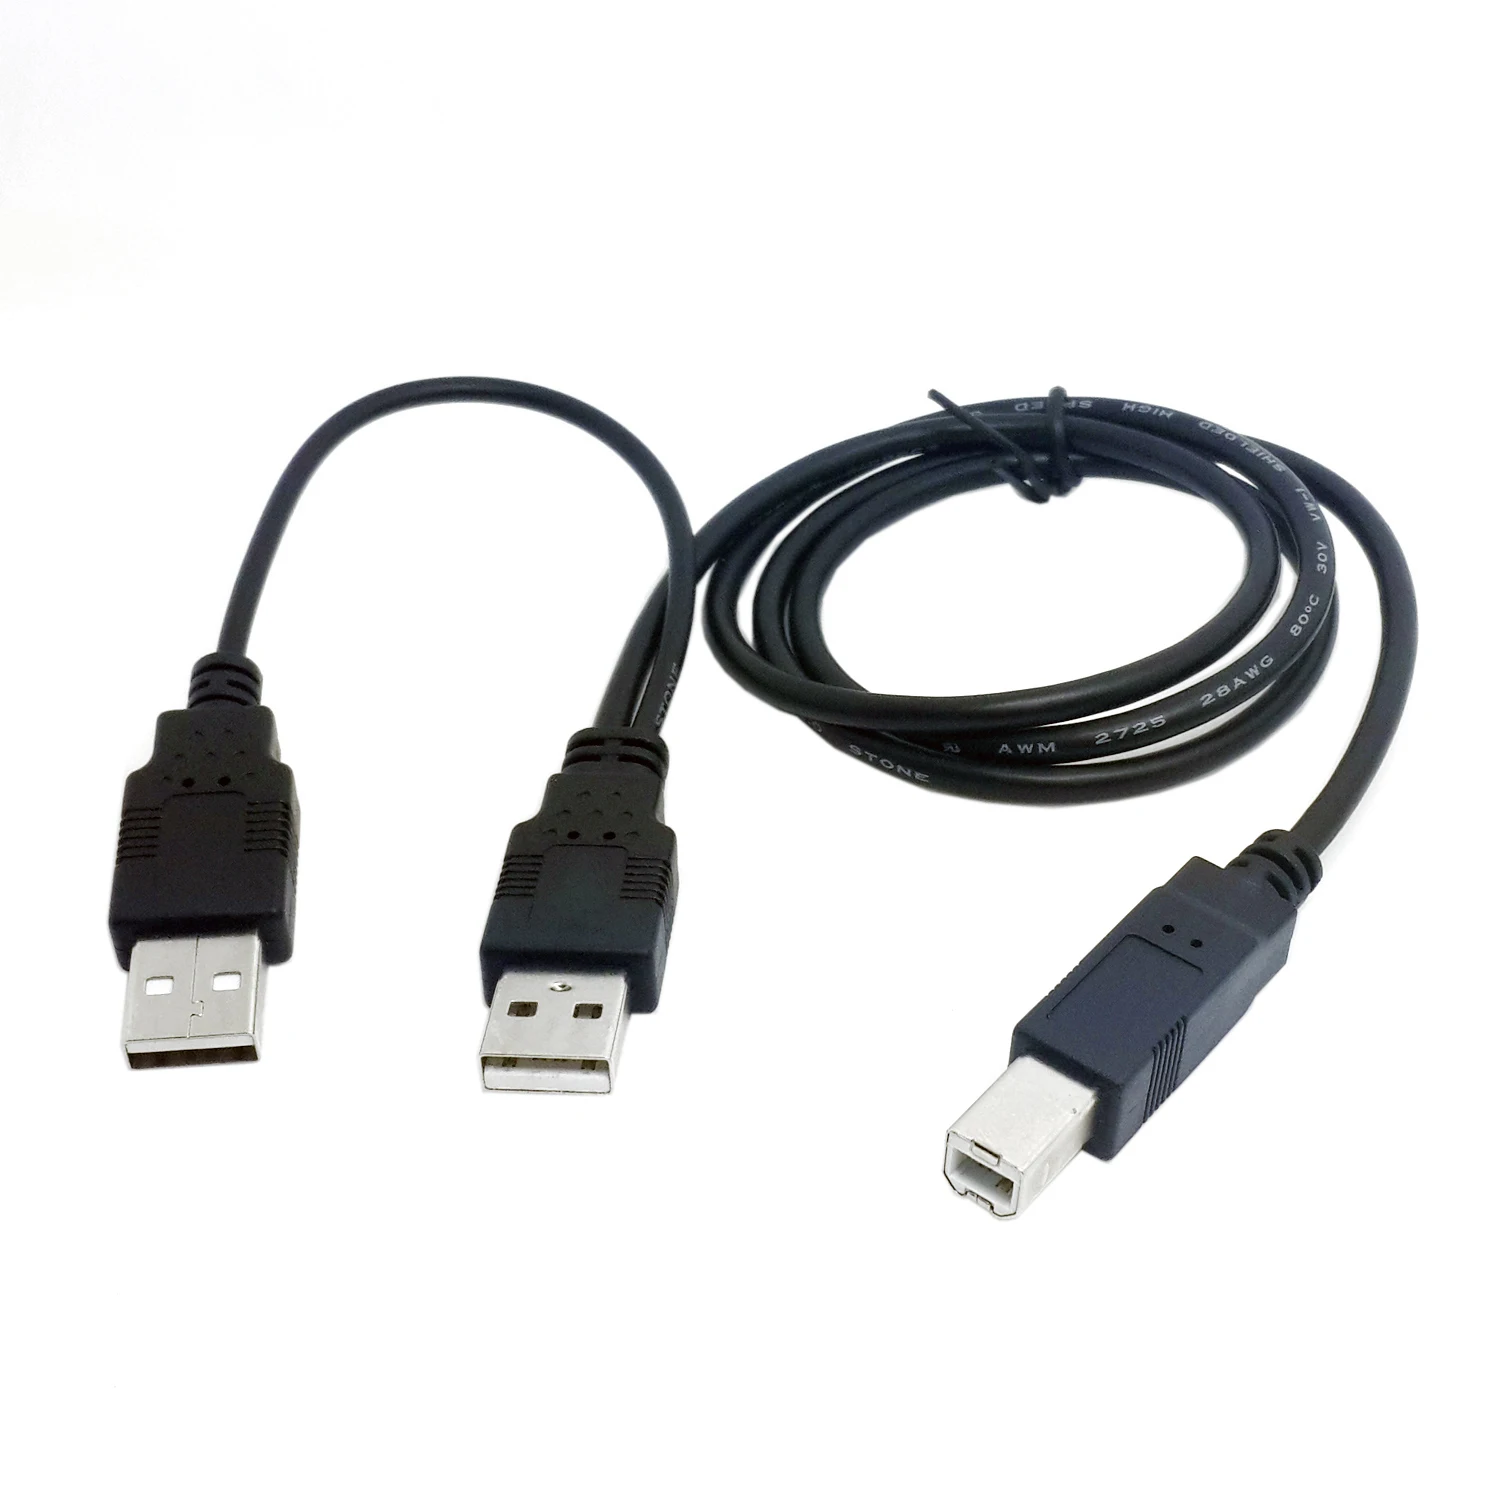 

CY 80cm Dual USB 2.0 Male to Standard B Male Y Cable for Printer & Scanner & External Hard Disk Drive